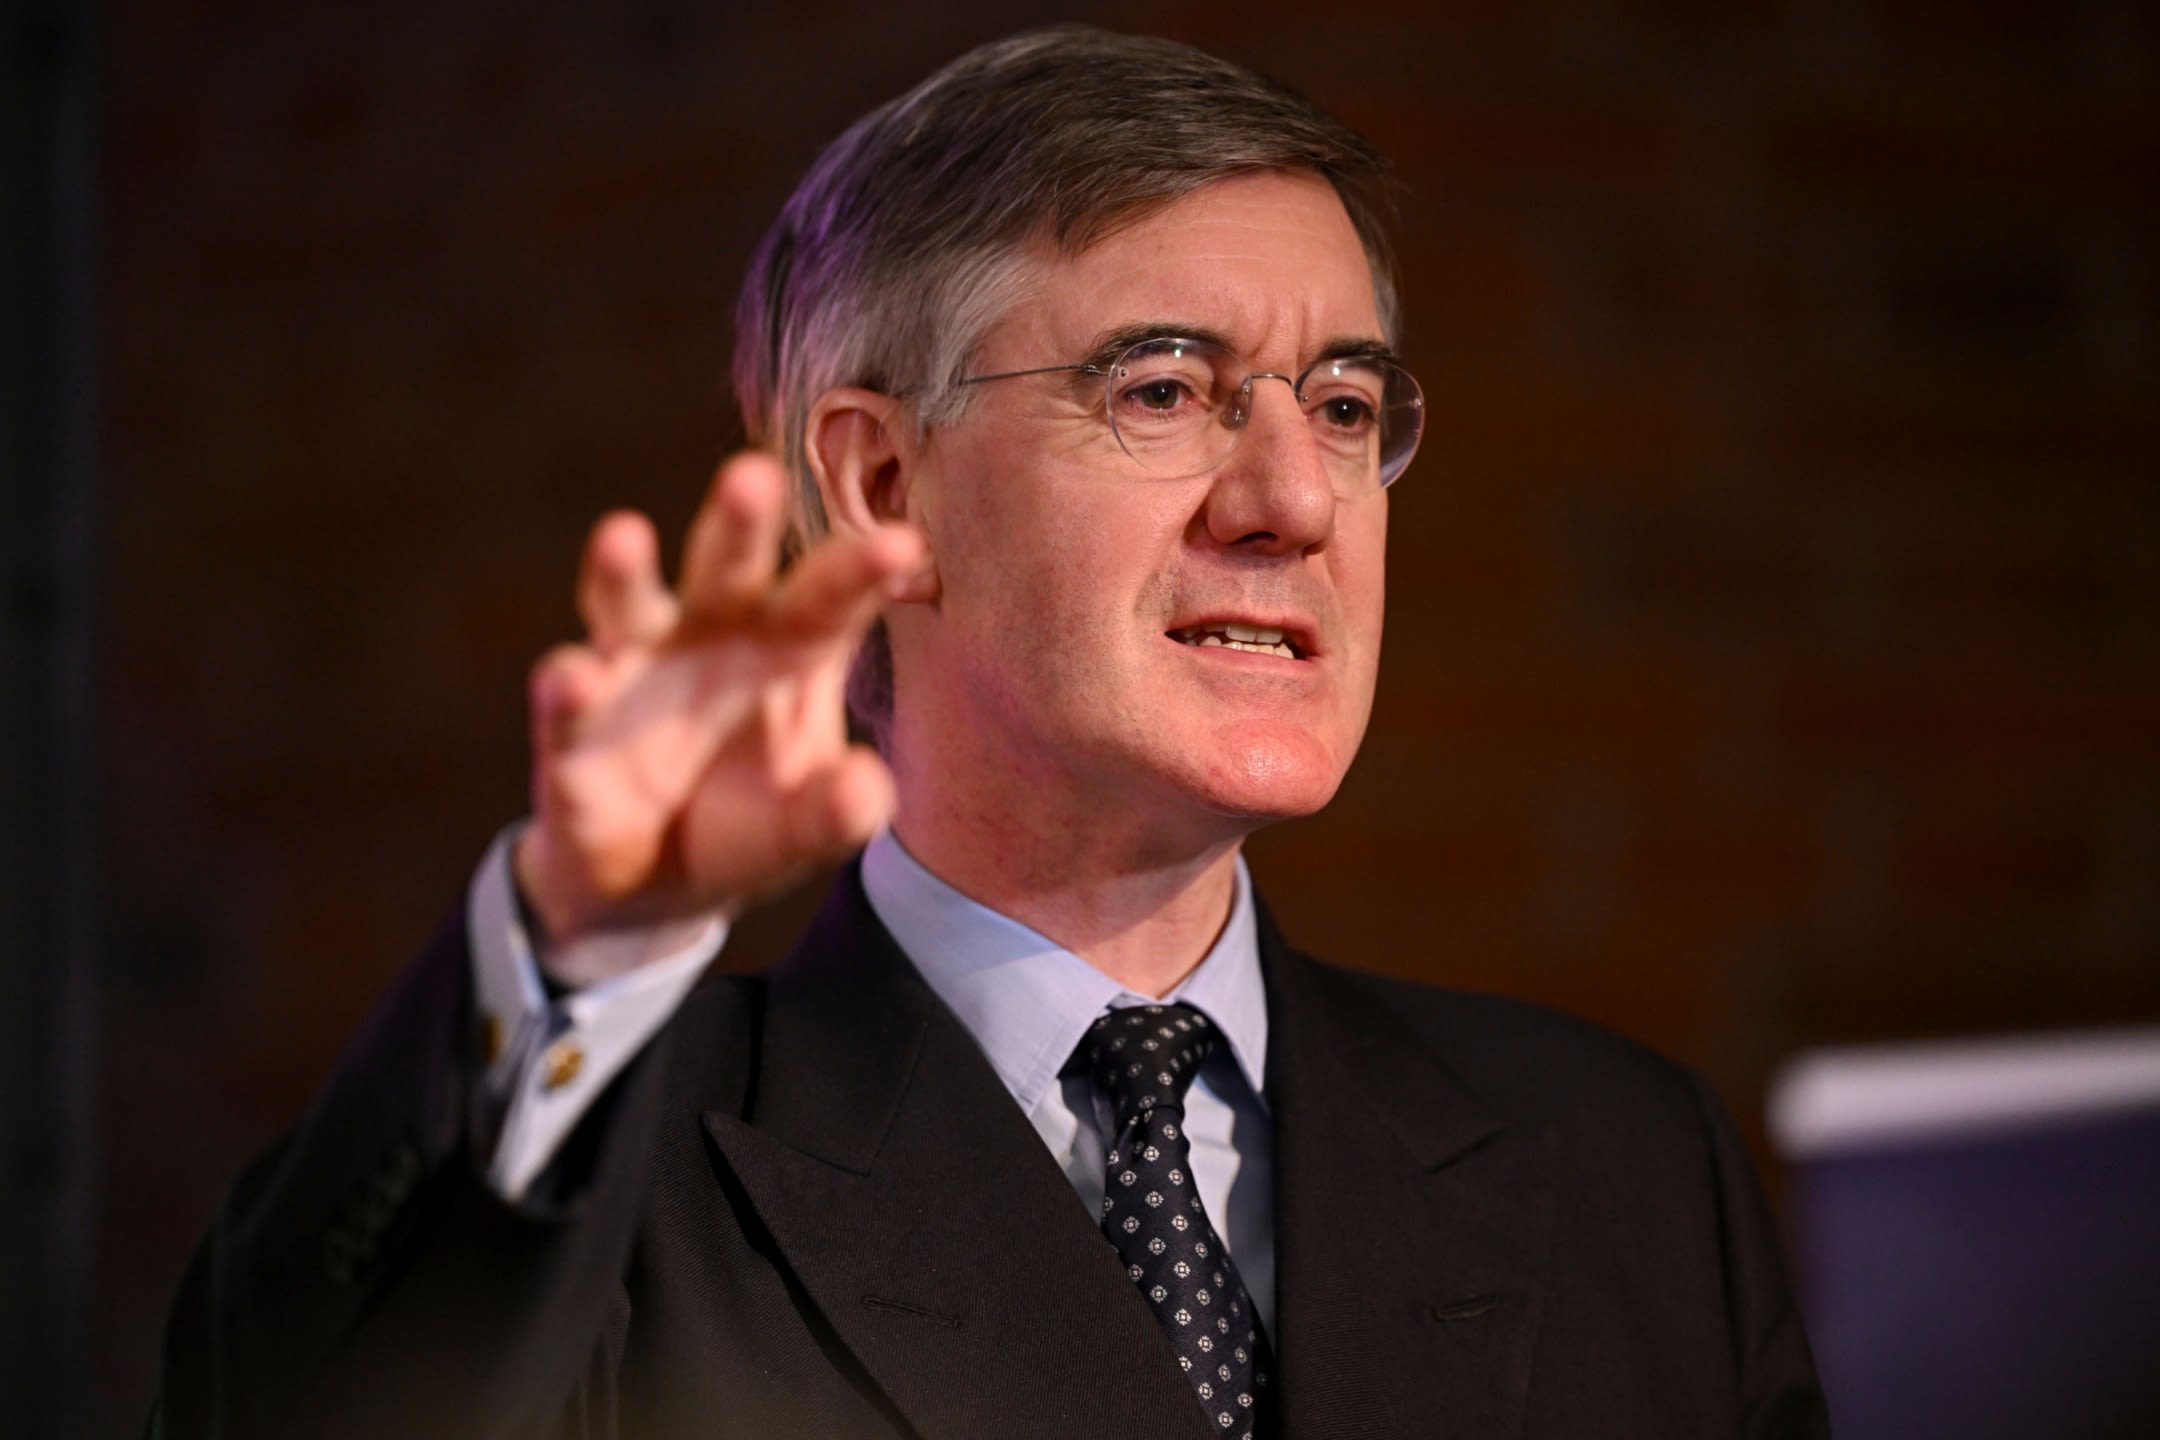 Controversial British Politician Jacob Rees-Mogg Gets Discovery+ Docuseries